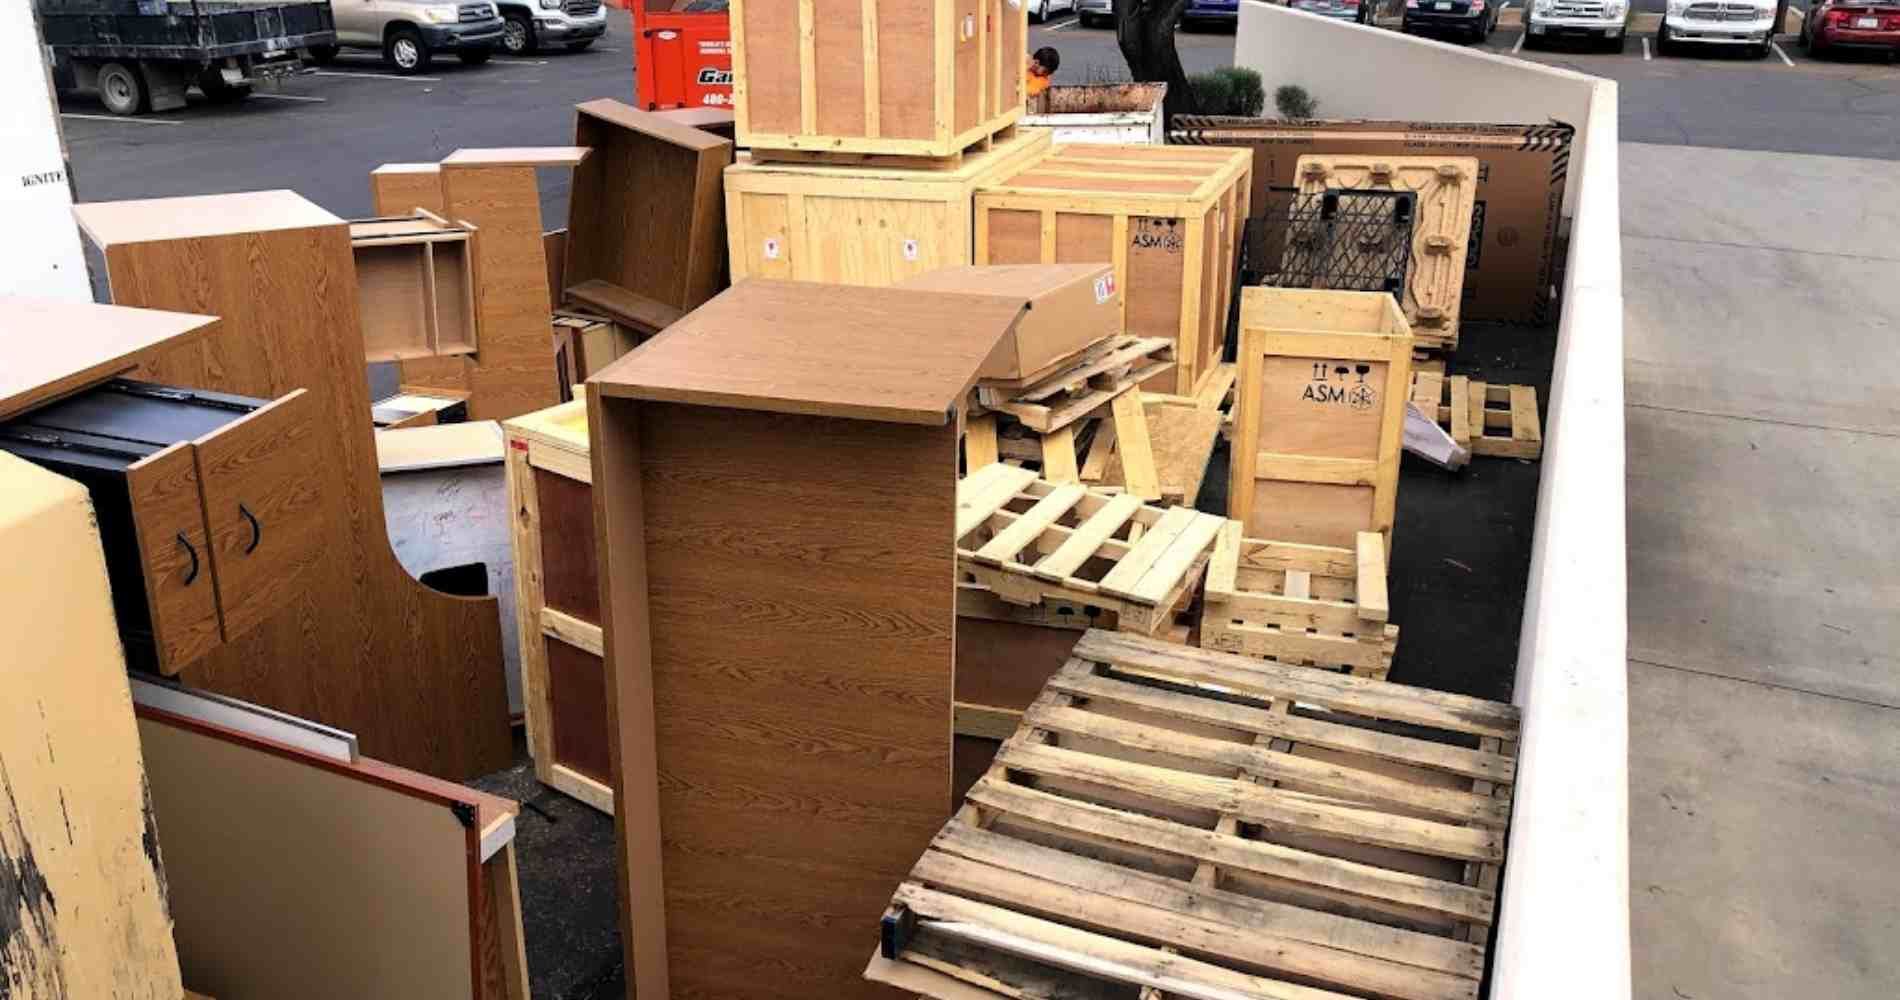 #1 for Pallet Disposal in Glendale, AZ With Over 1200 5-Star Reviews!